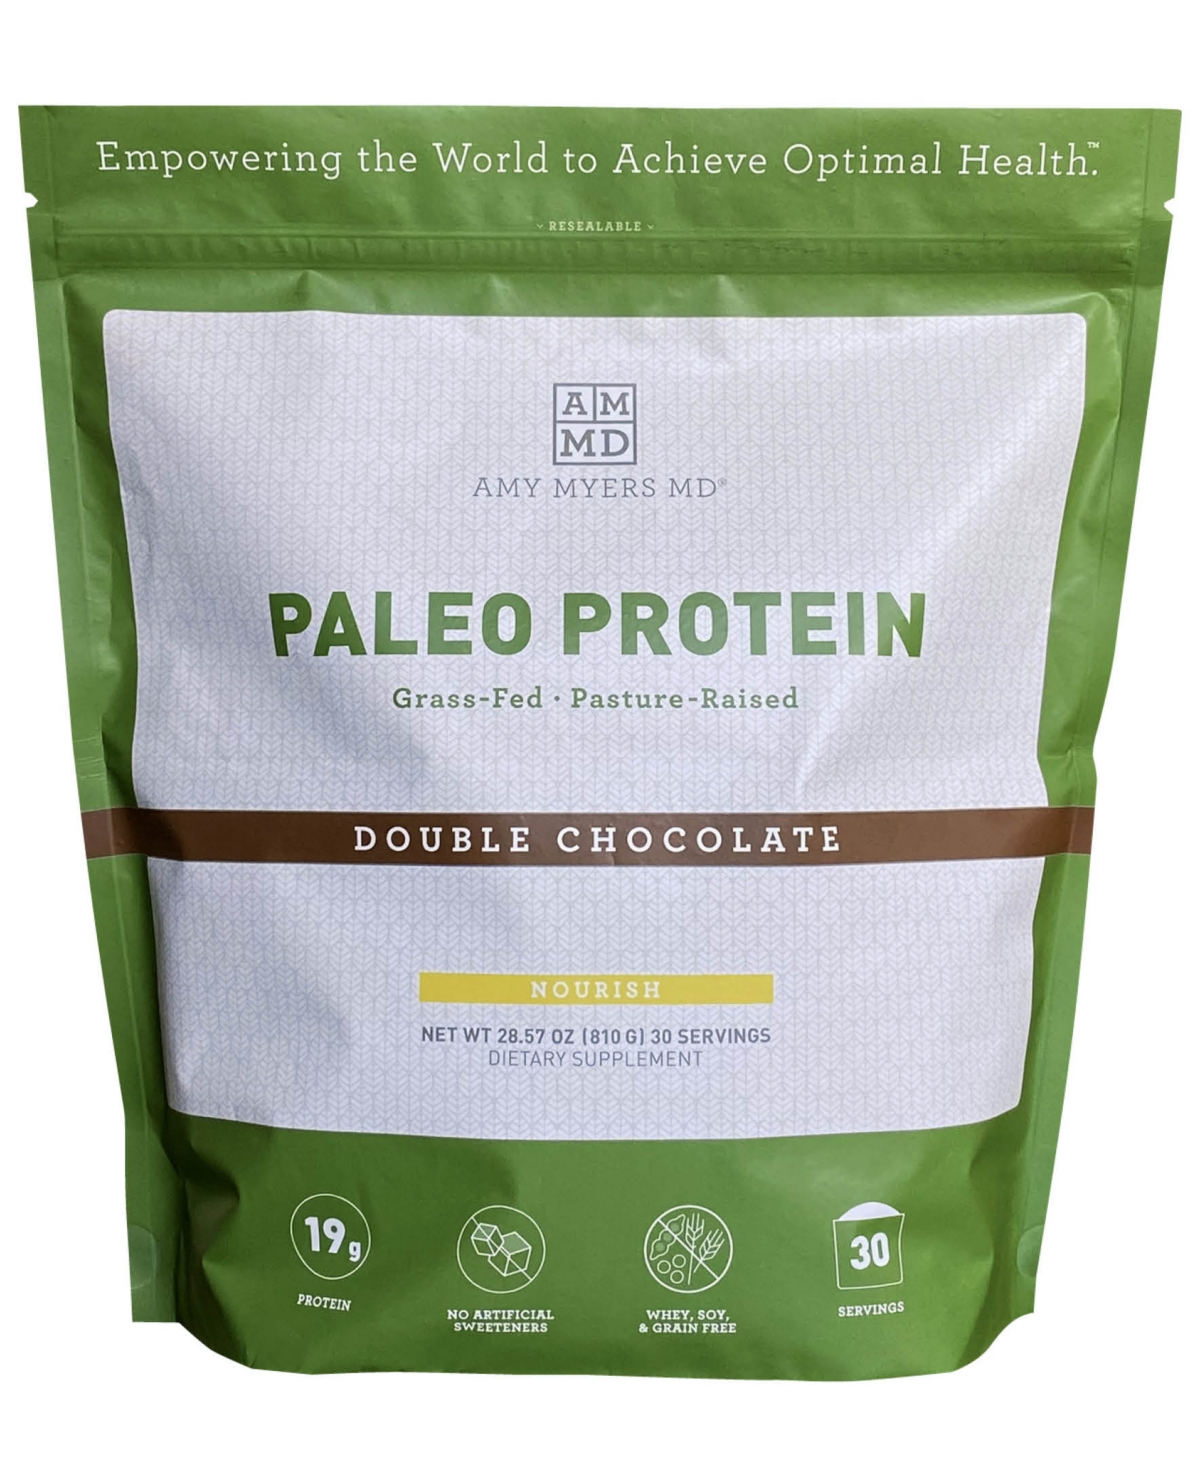 Amy Myers Md Paleo Protein - Double Chocolate In No Color